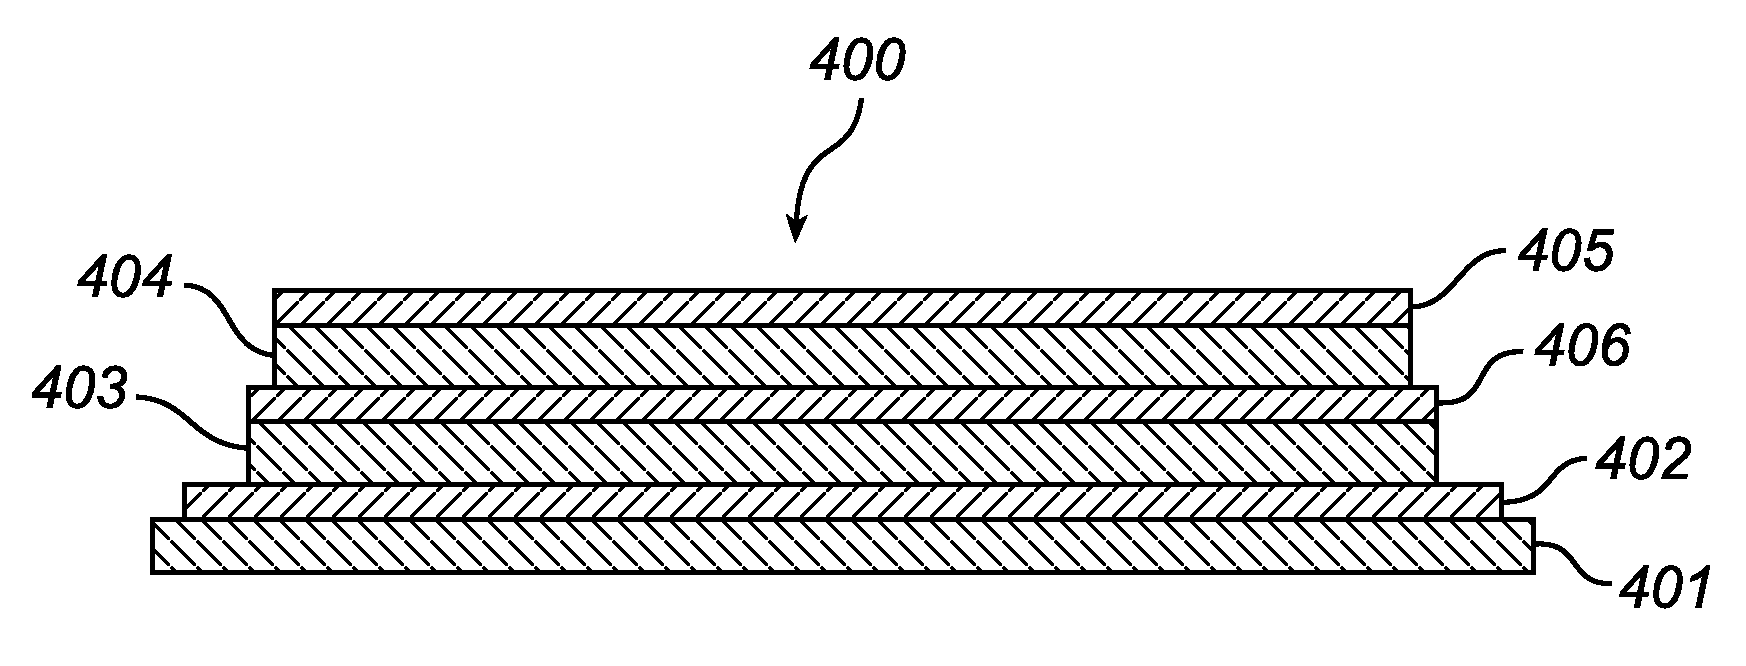 Organic light emitting device with increased light out coupling